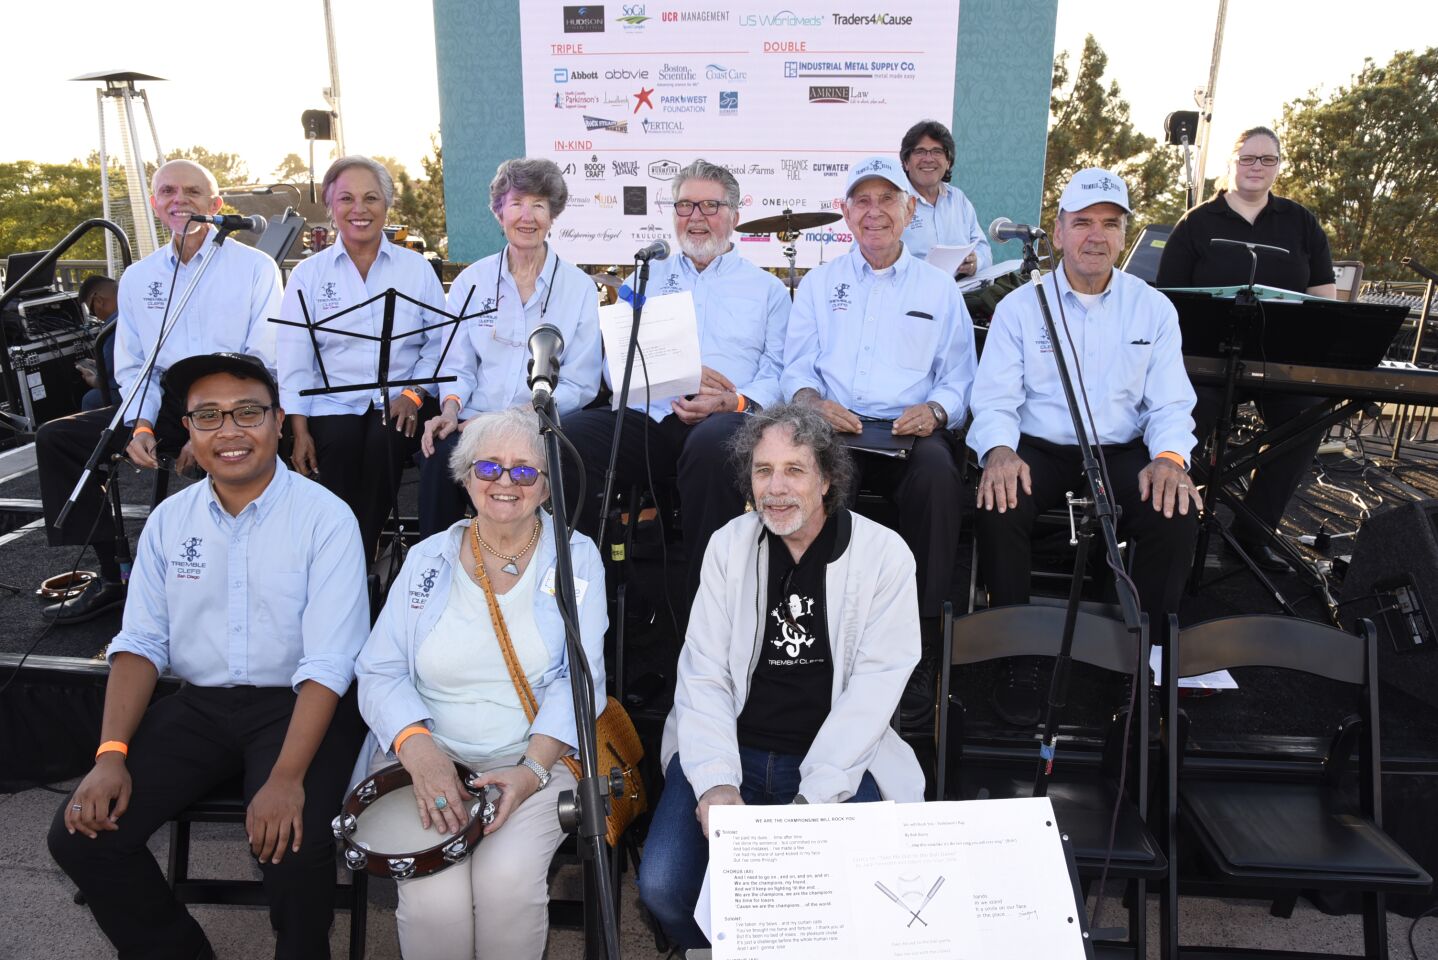 The Tremble Clefs San Diego entertained